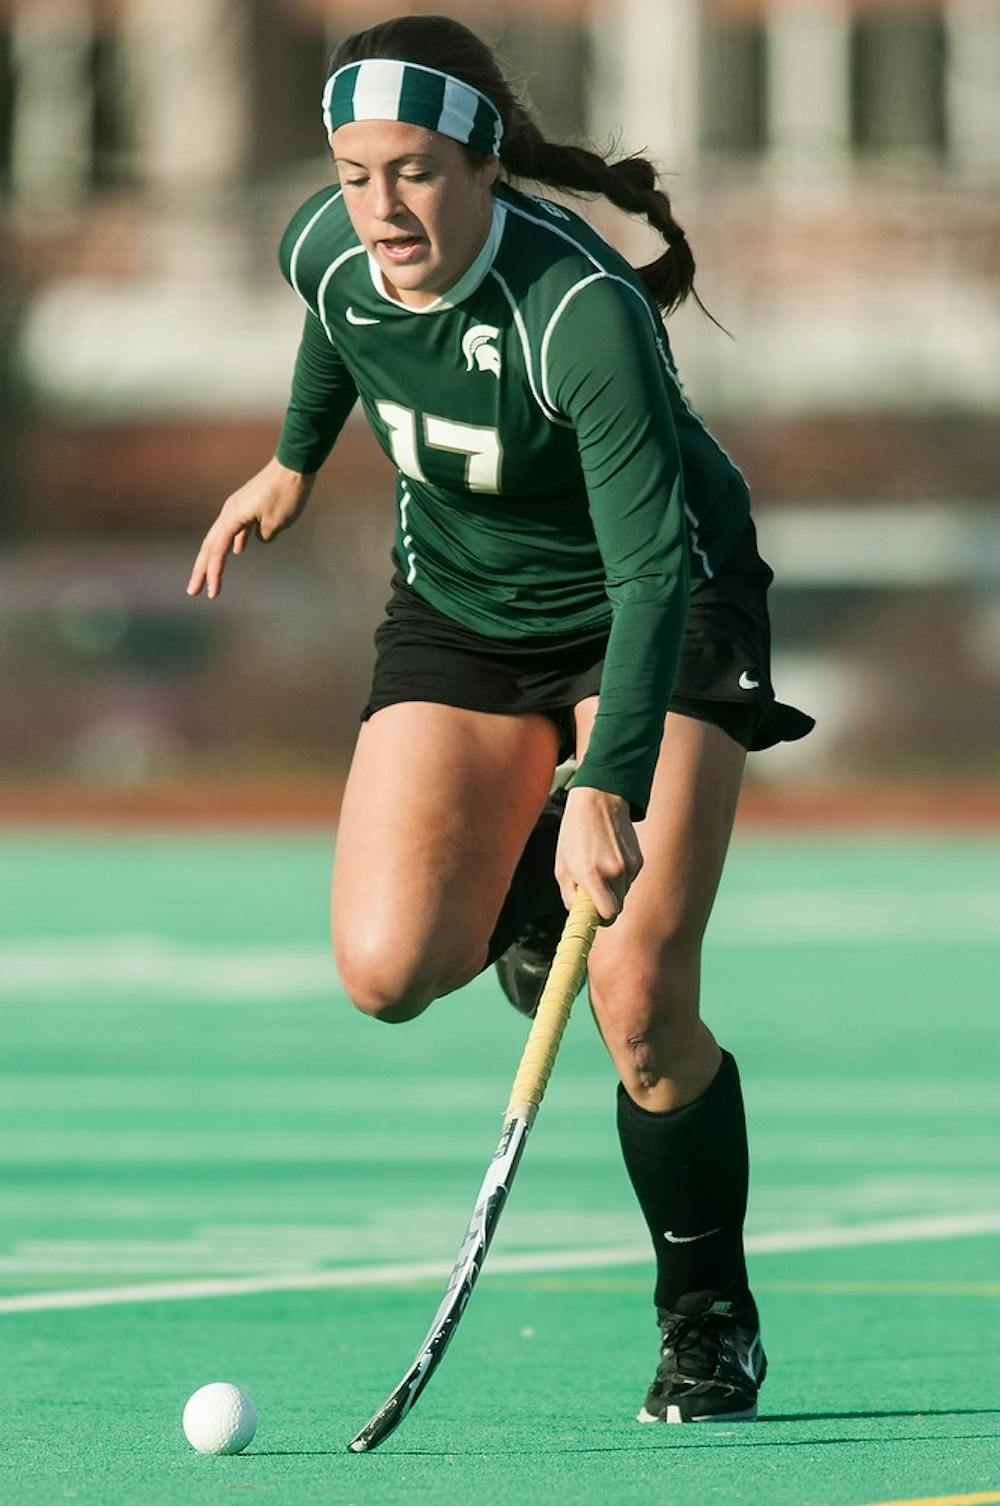 	<p>Junior forward Allie Ahern breaks away towards the net during the game against Miami (Ohio) on Nov. 13, 2013, at Ralph Young Field. The Spartans defeated the Redhawks, 3-0, during the first round of the <span class="caps">NCAA</span> tournament. Danyelle Morrow/The State News</p>